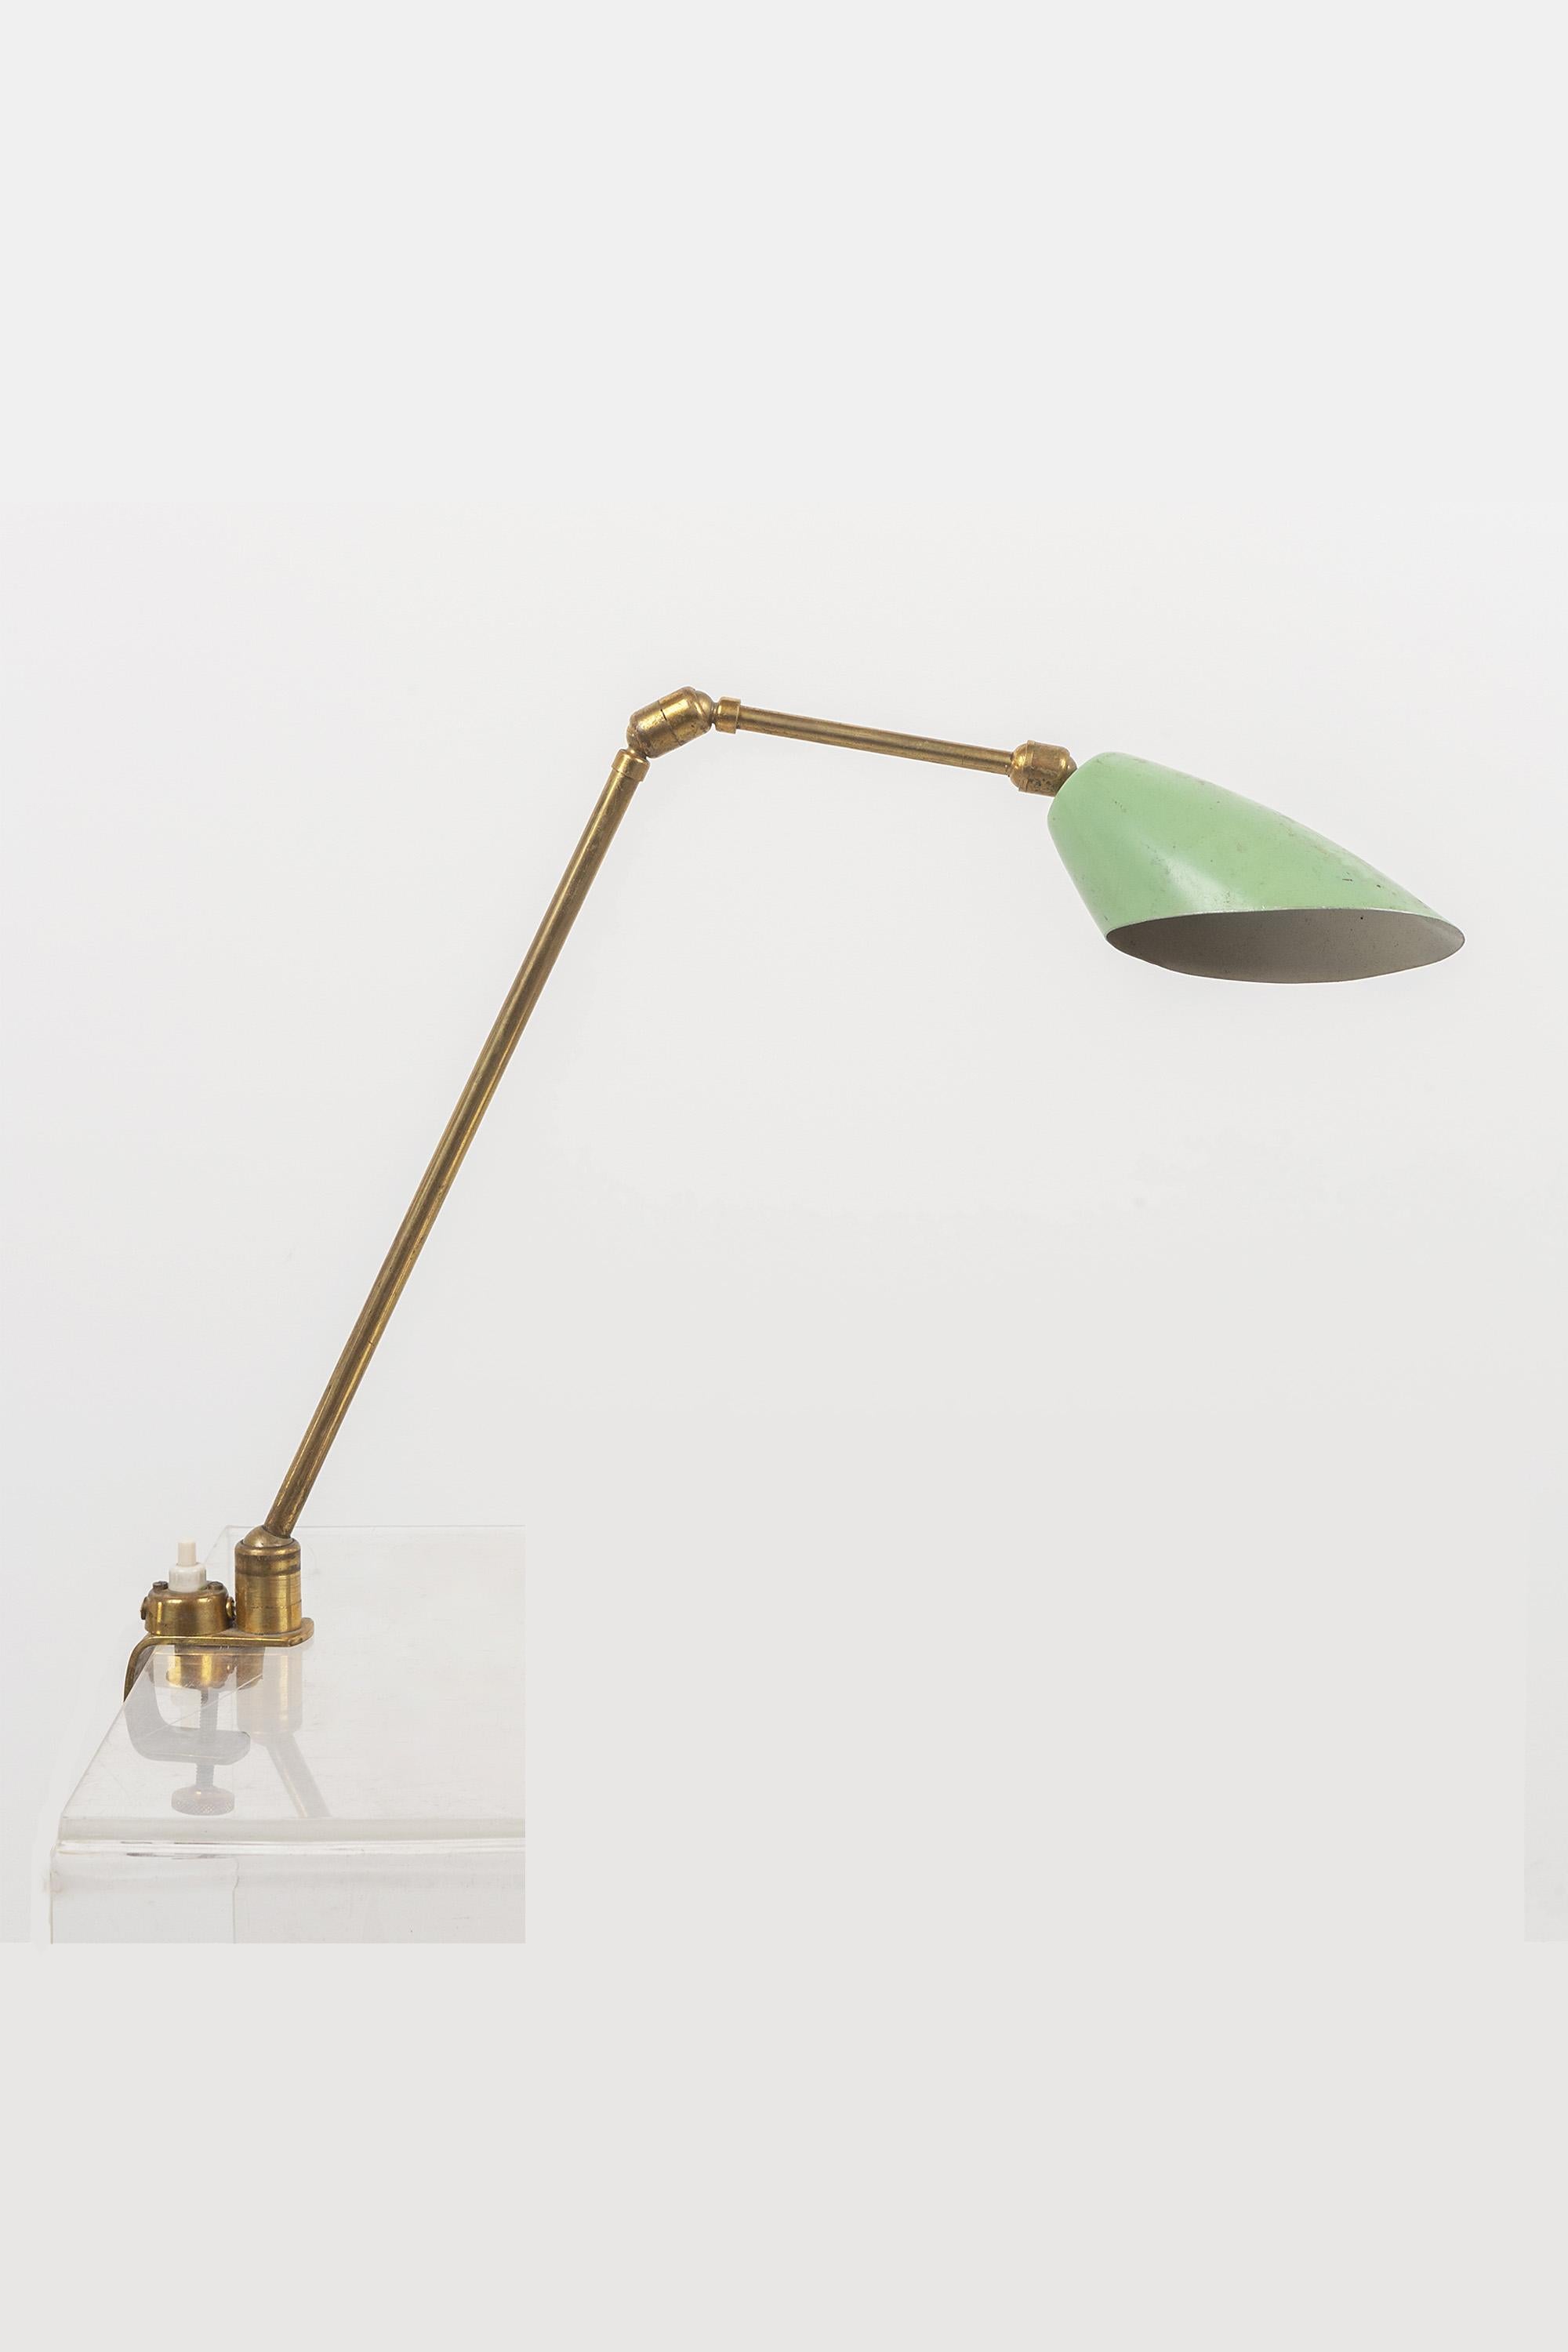 Italian Articulated Desk Lamp with Clamp Fixing, 1950s In Good Condition For Sale In London, GB